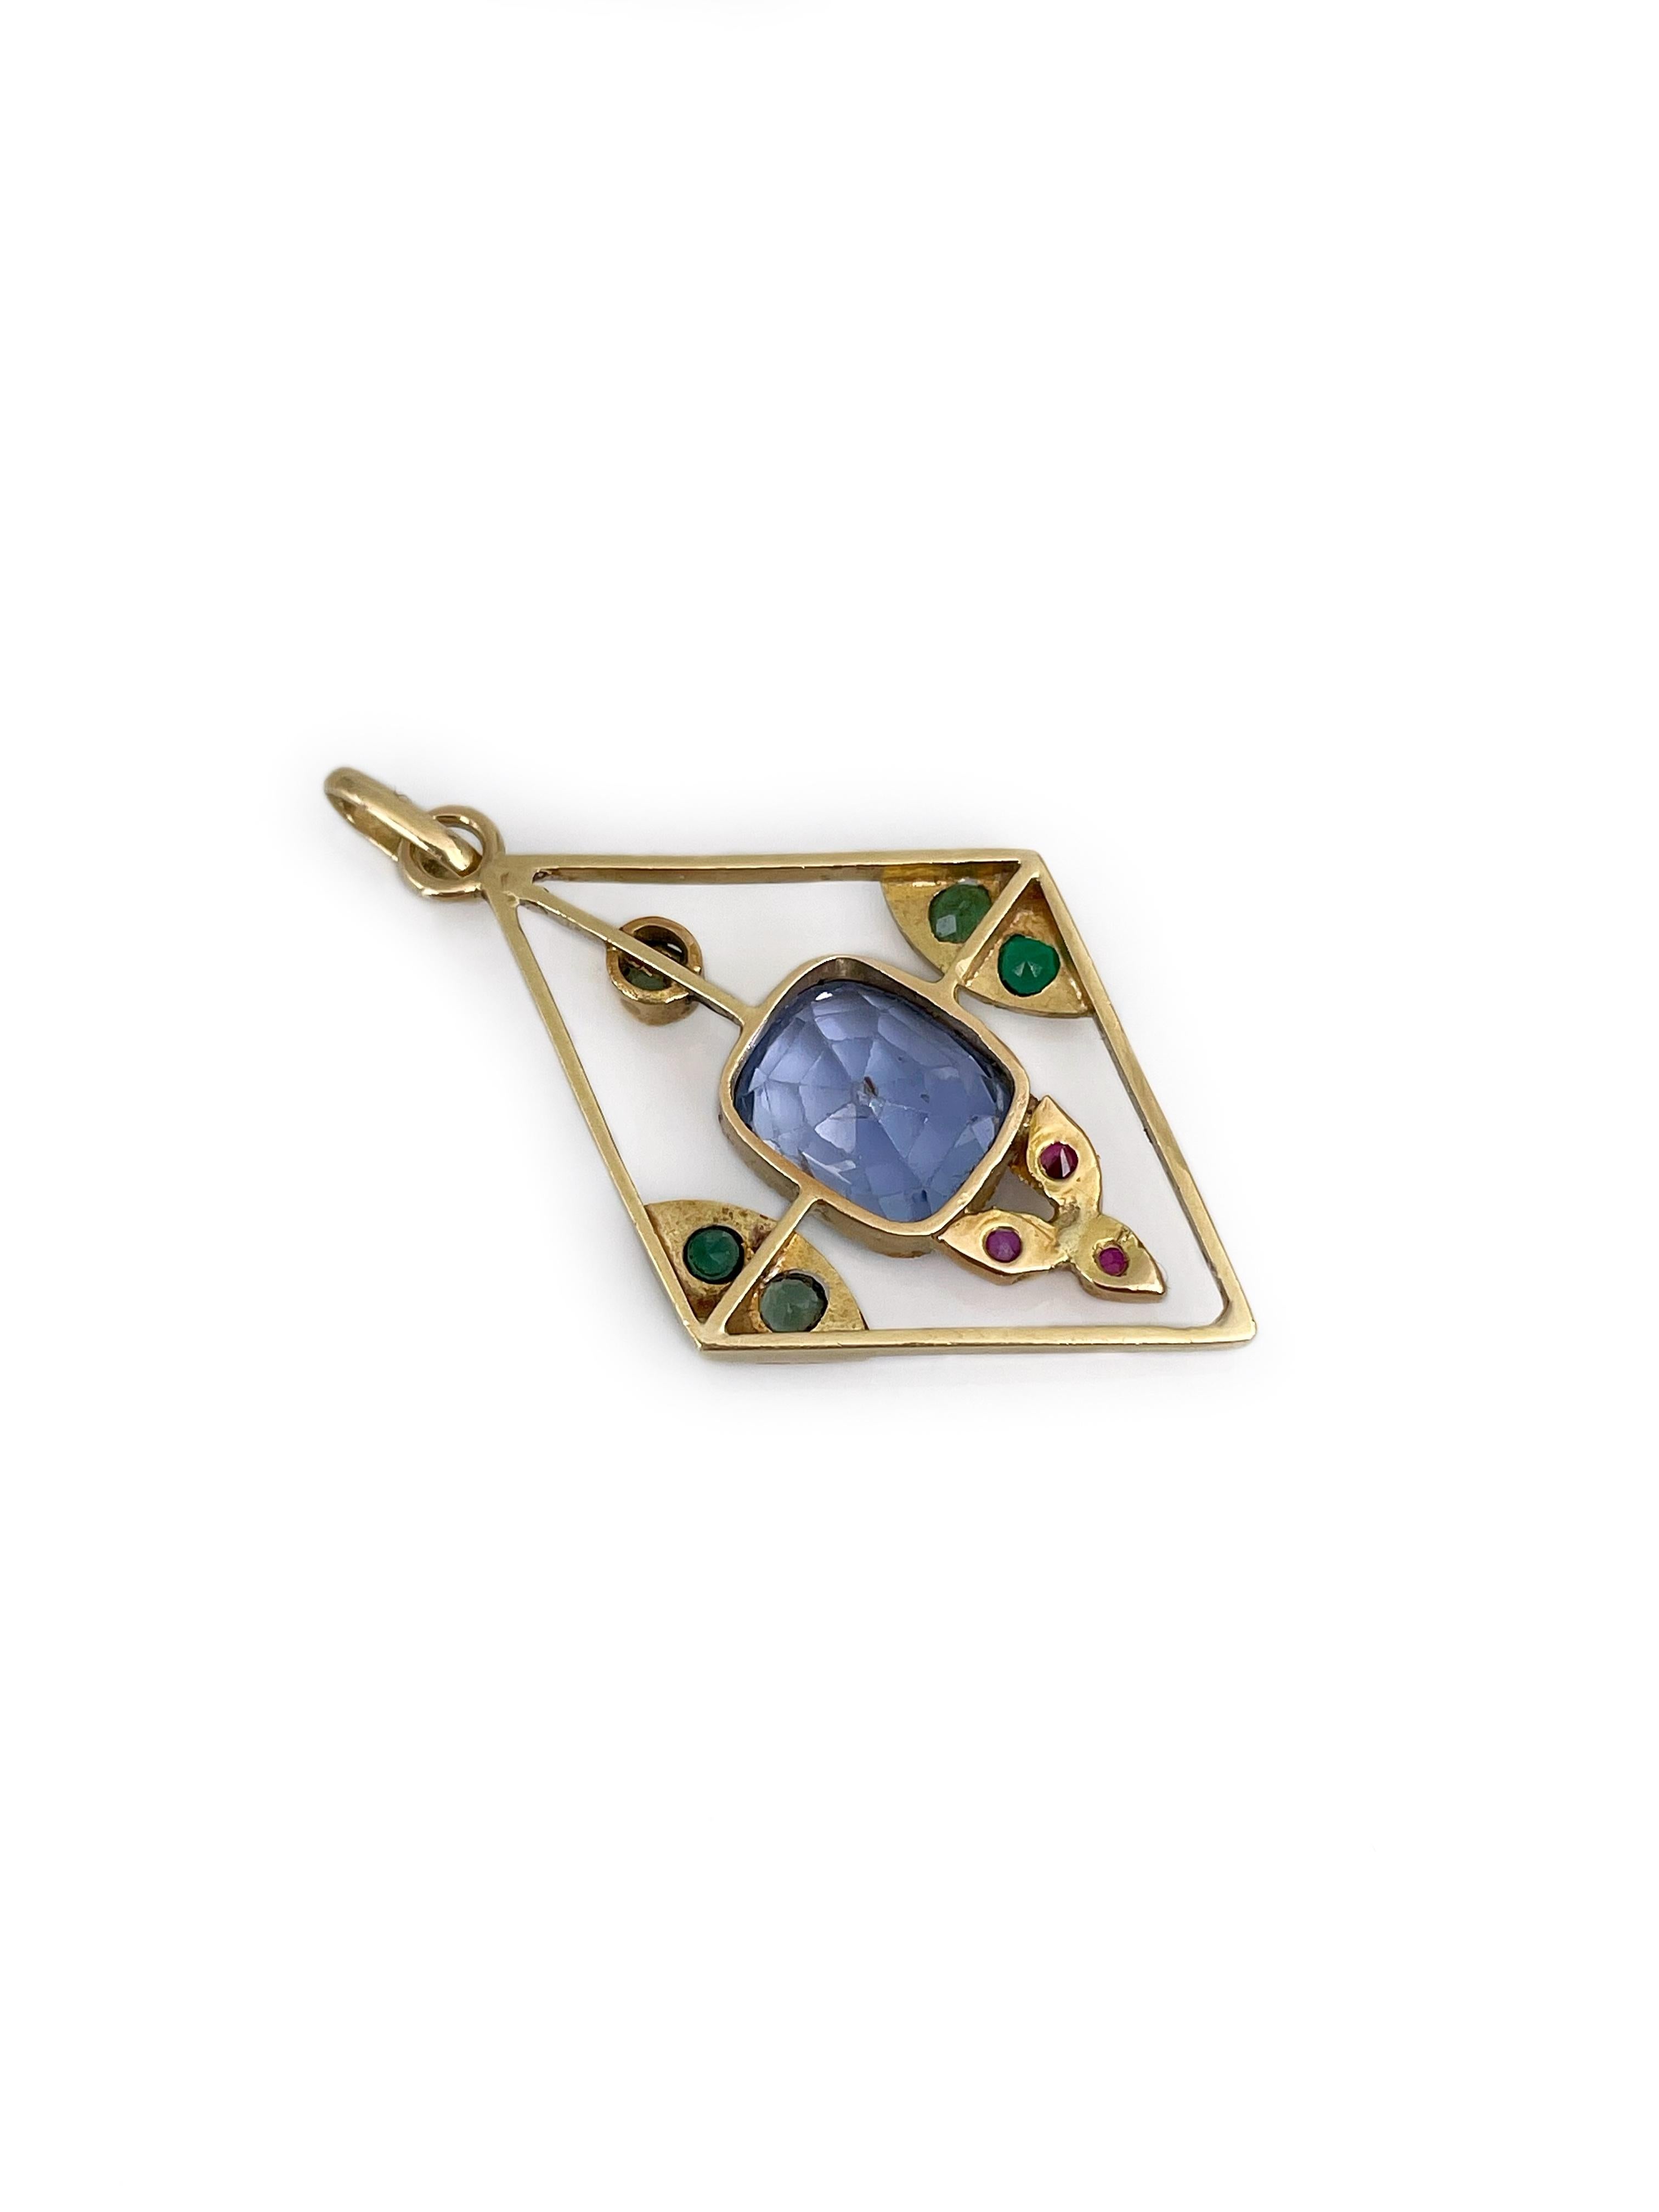 It is a lovely Edwardian rhombus pendant necklace crafted in 18K yellow gold. Sapphire’s mount - 14K gold. 
The piece features: 
- 1 sapphire: cushion cut, 2.35ct, vB 3/3, SI
- 3 rubies: round cut, 0.06ct, rO 3/1, VS
- 5 emeralds: round and oval